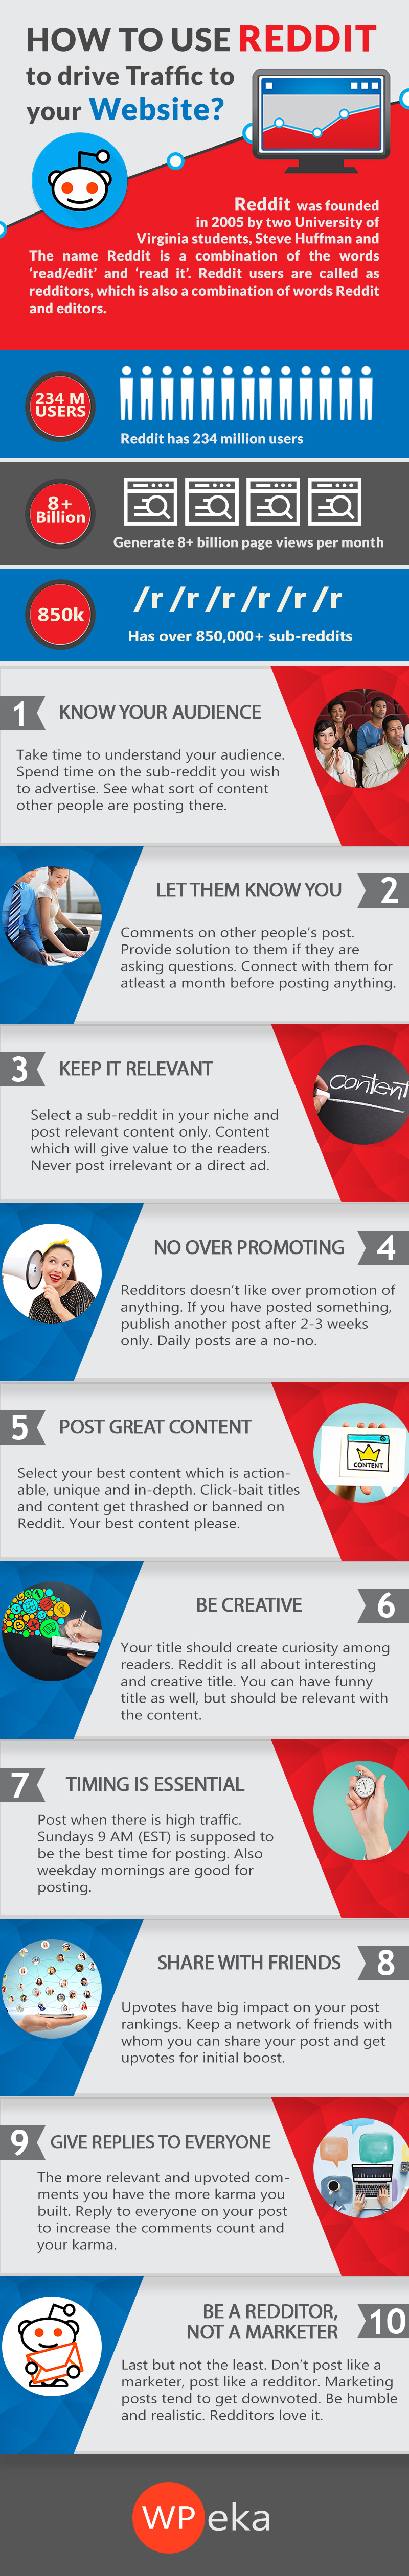 how to generate traffic from reddit infographic